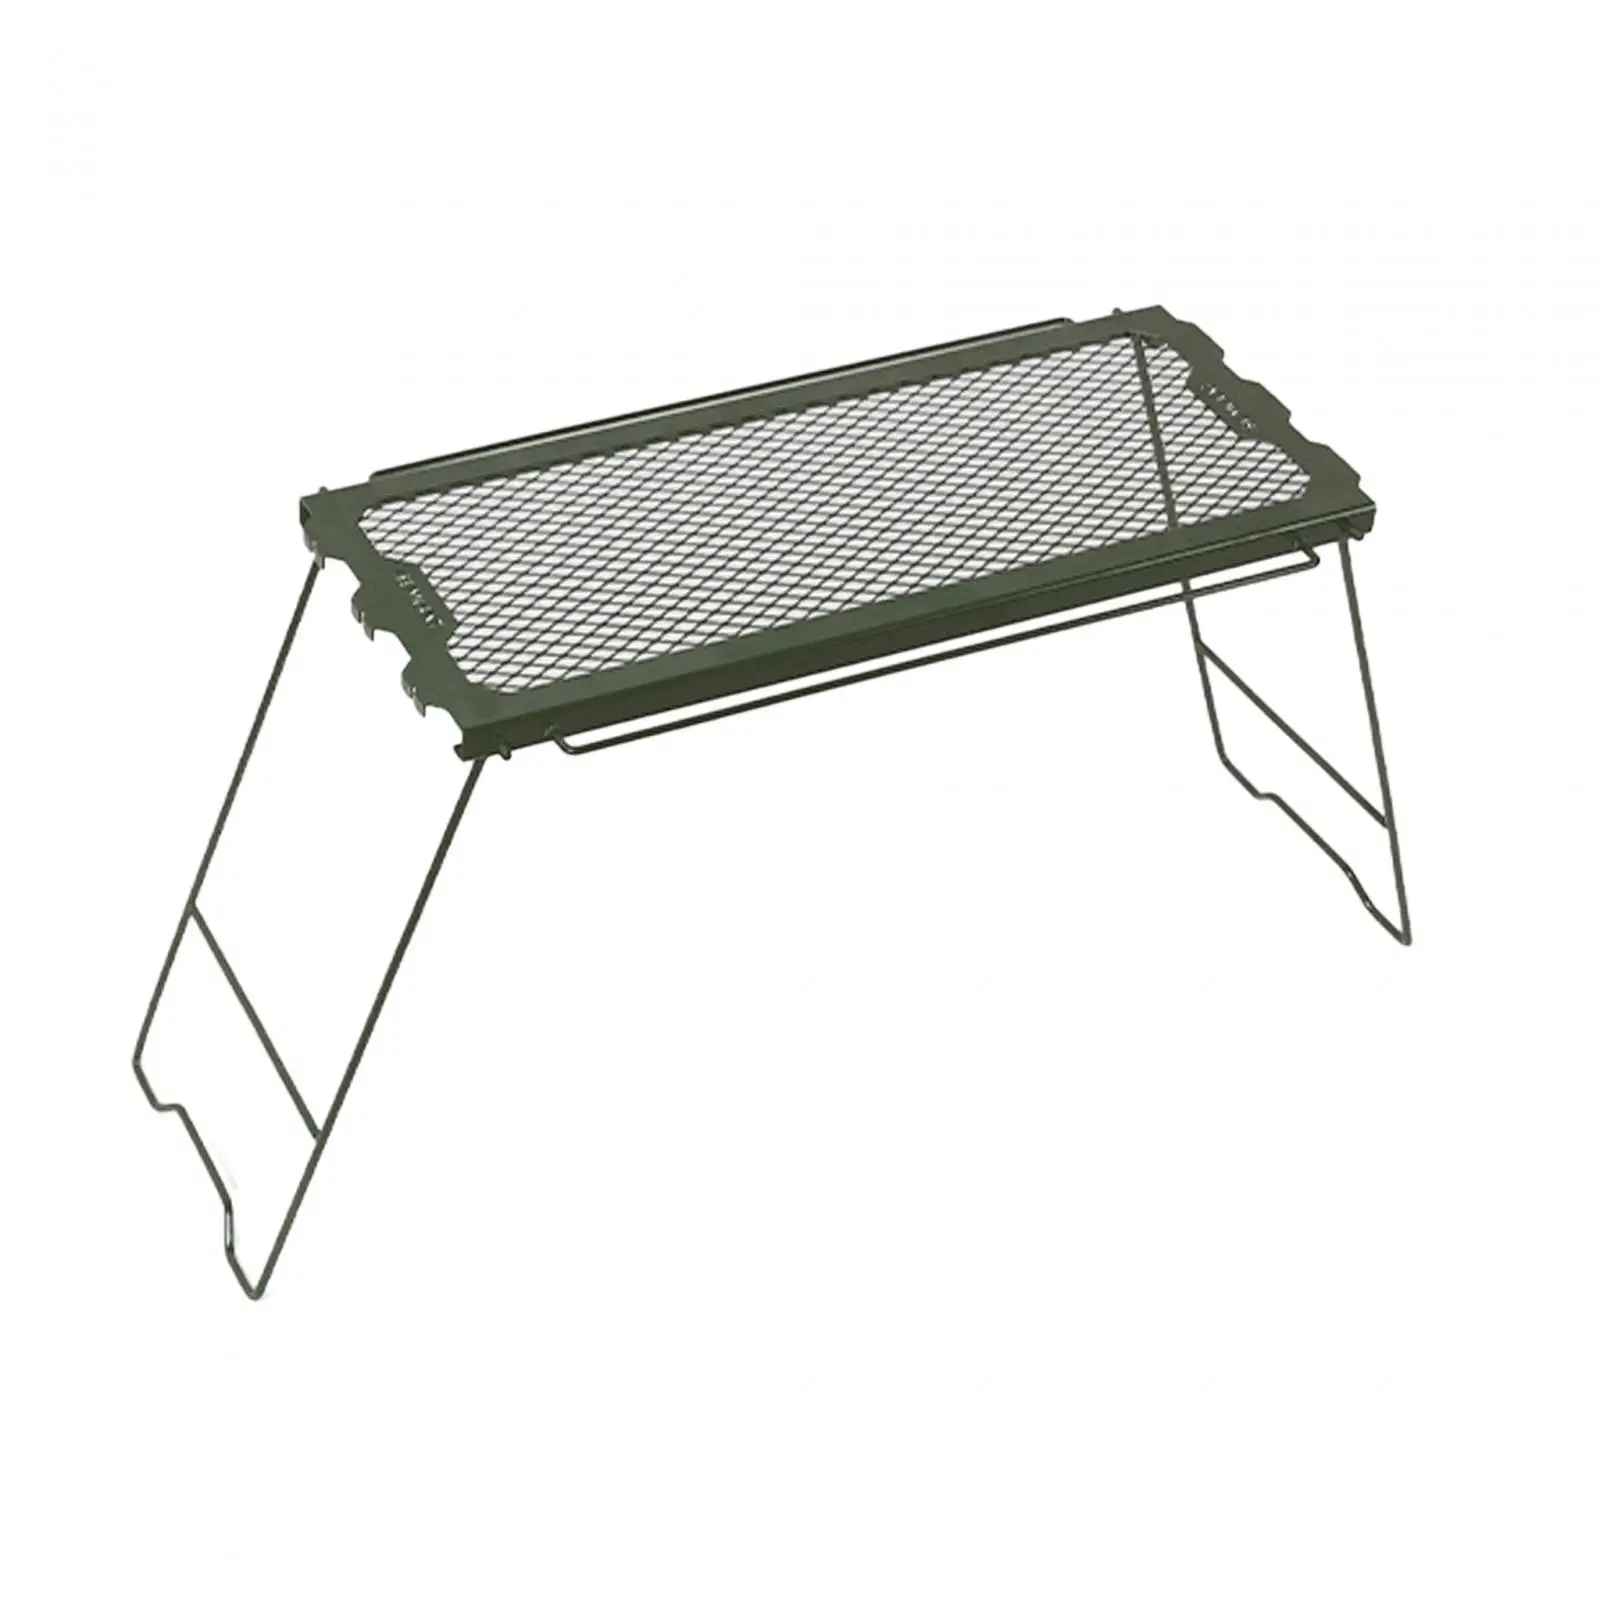 Folding Camping Table, Cooking Grate Overfire Desk Grid Table, Folding Campfire Grill, Small Table for Patio Outdoor BBQ